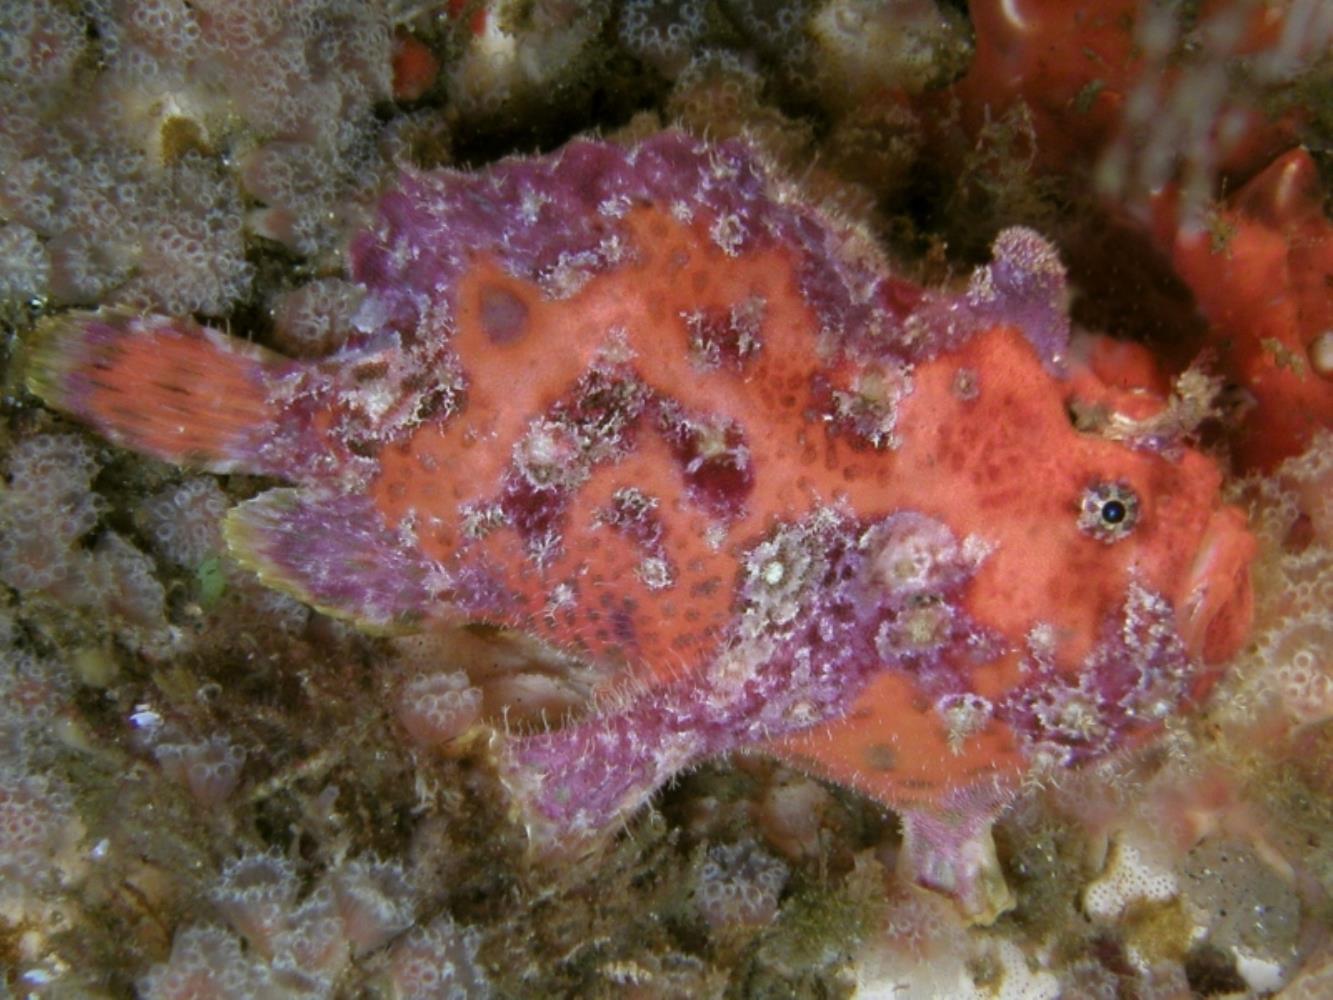 Bloody frogfish